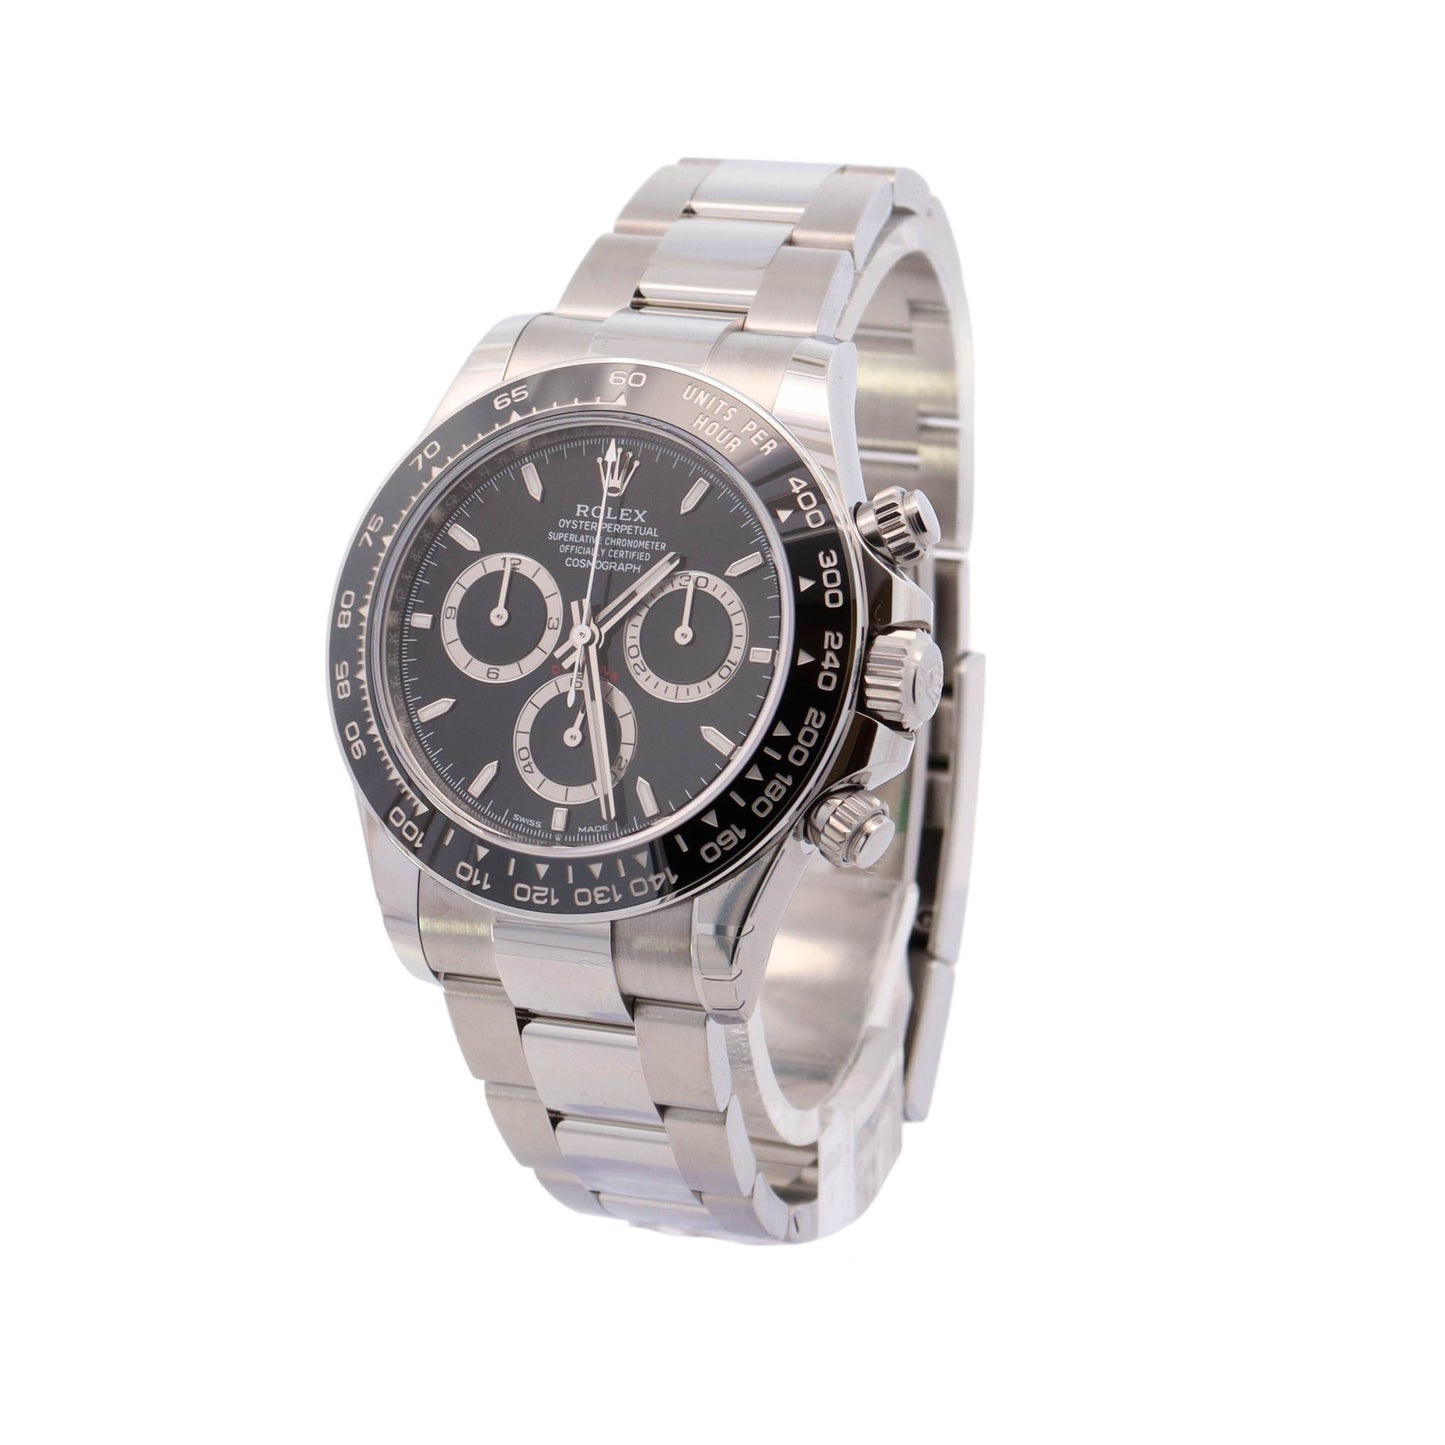 Rolex Daytona Stainless Steel 40mm Black Chronograph Dial Watch Reference #: 126500LN